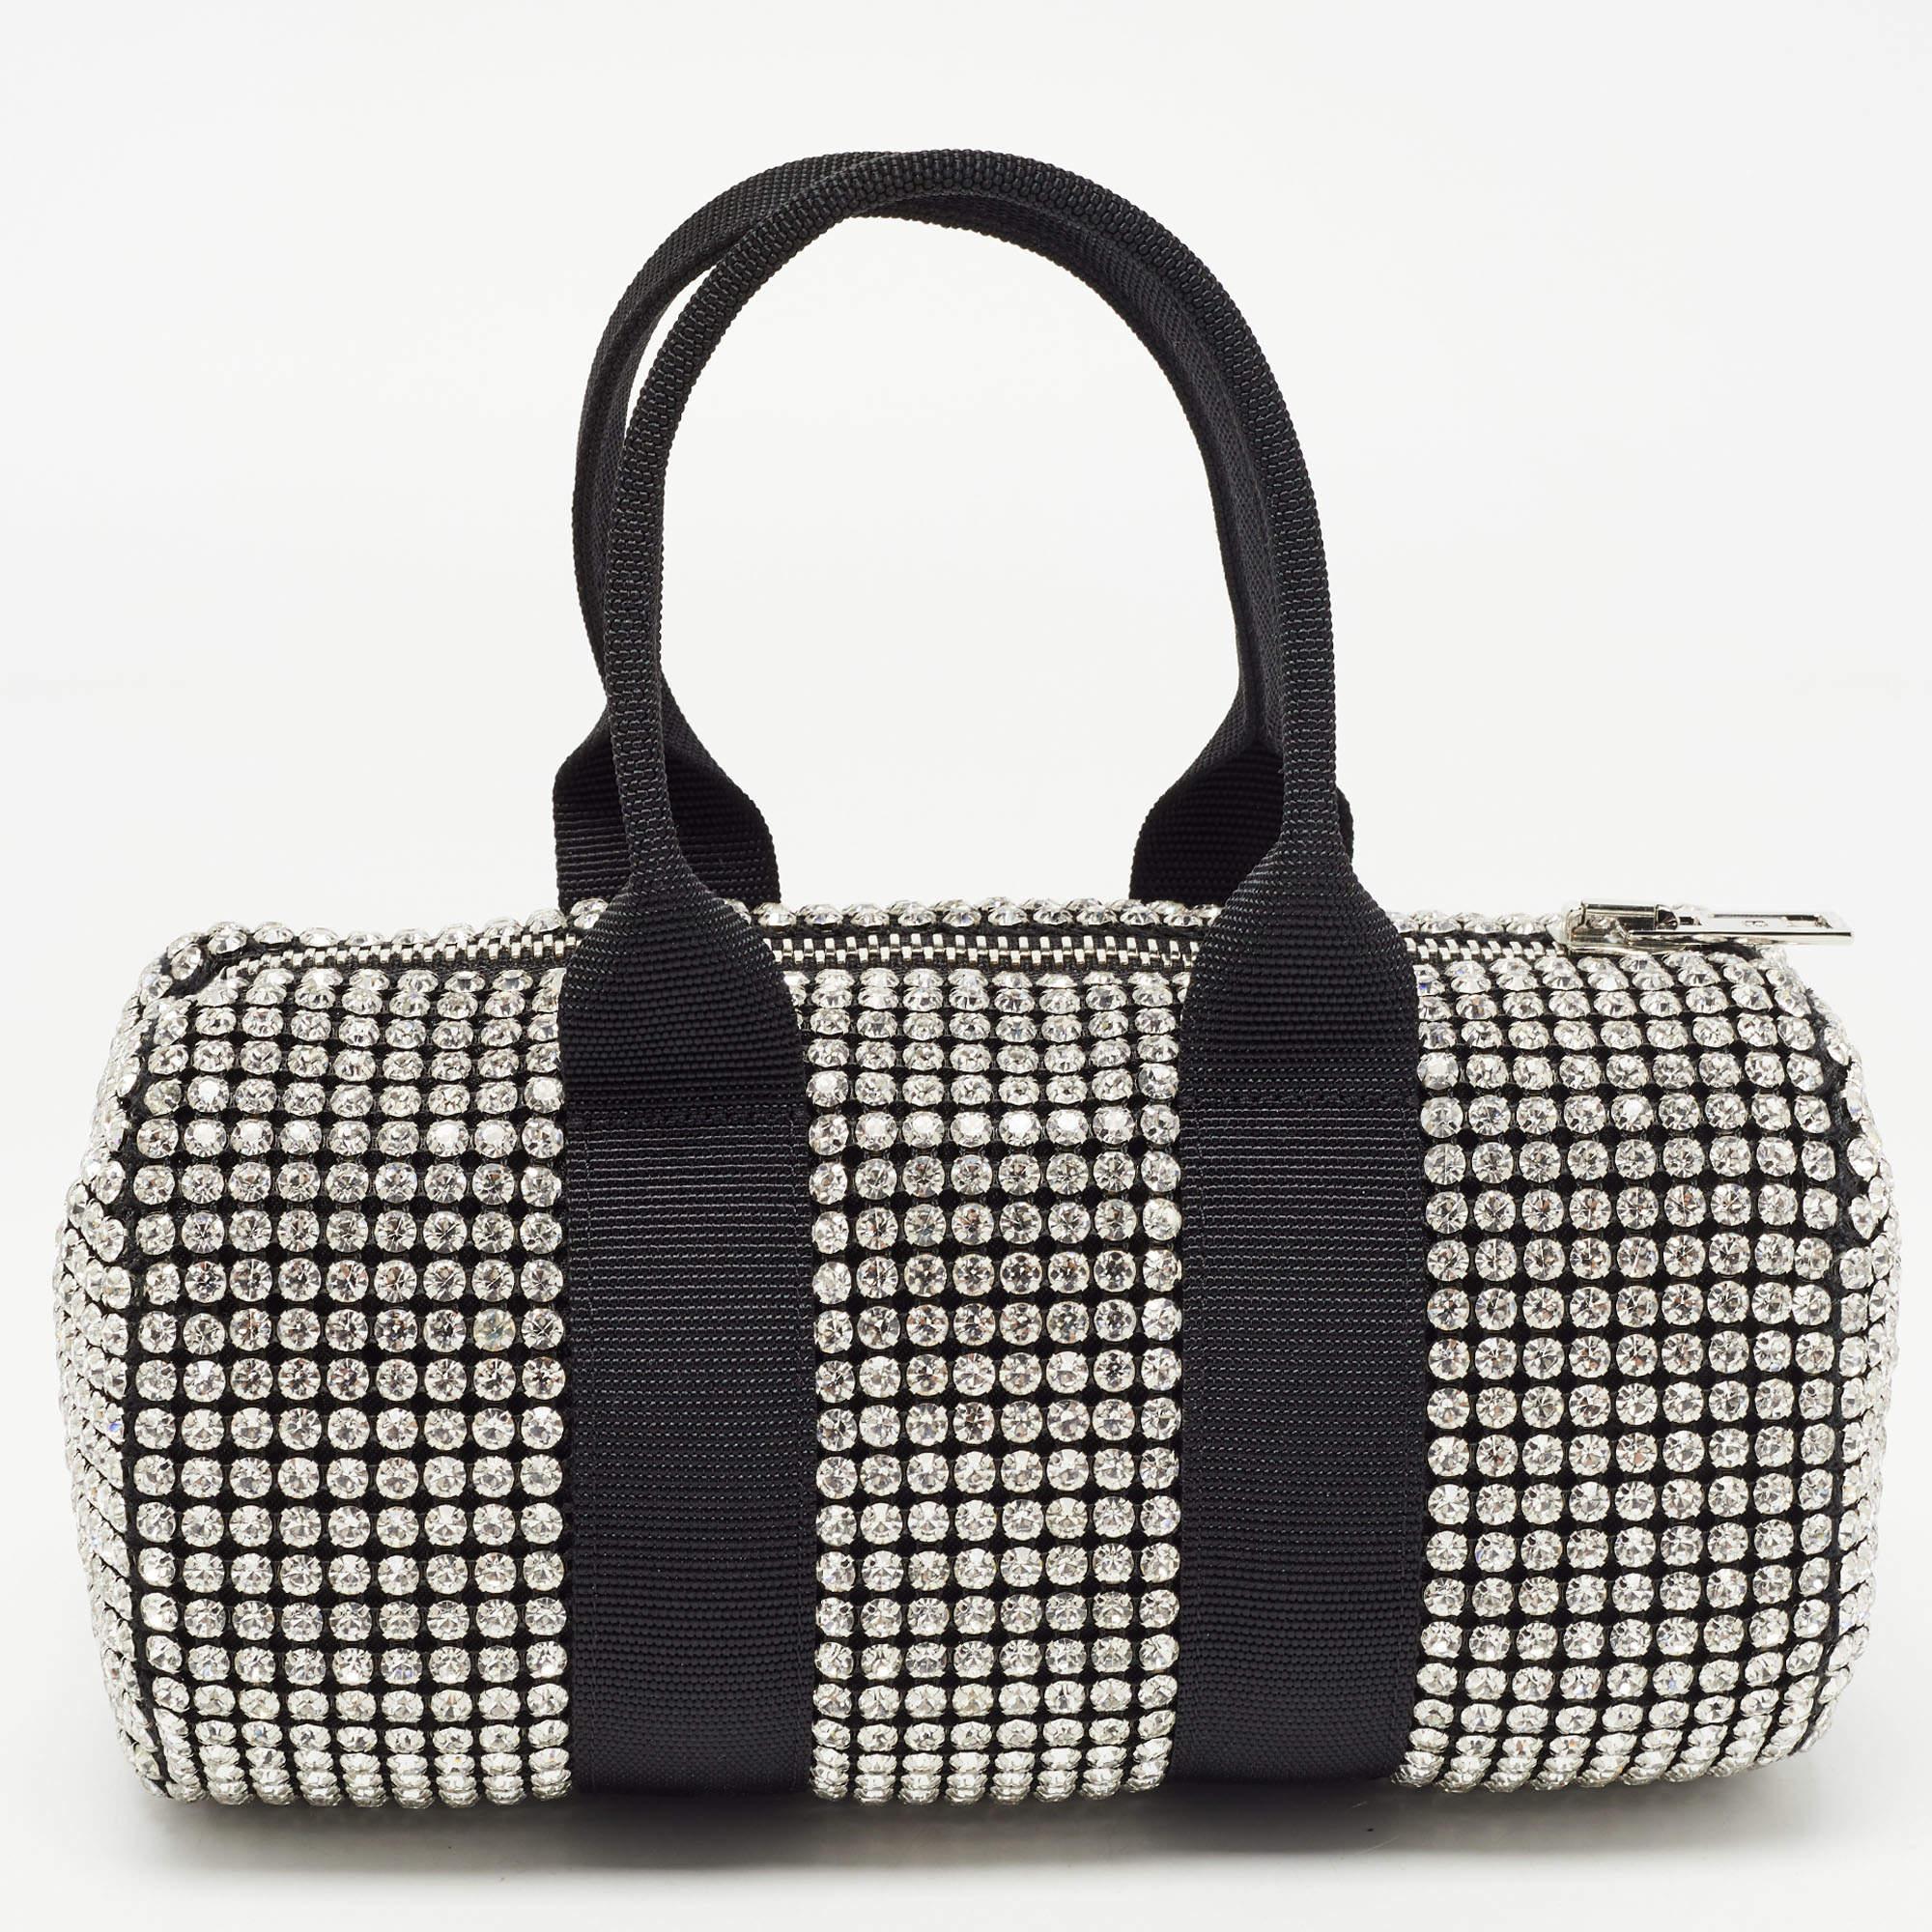 Alexander Wang's Mini Cruiser Duffle bag is decorated with shimmering crystals all over the exterior. It has two fabric handles and a nylon interior.

 Includes: Original Box, Info Booklet, Extra Embellishment
